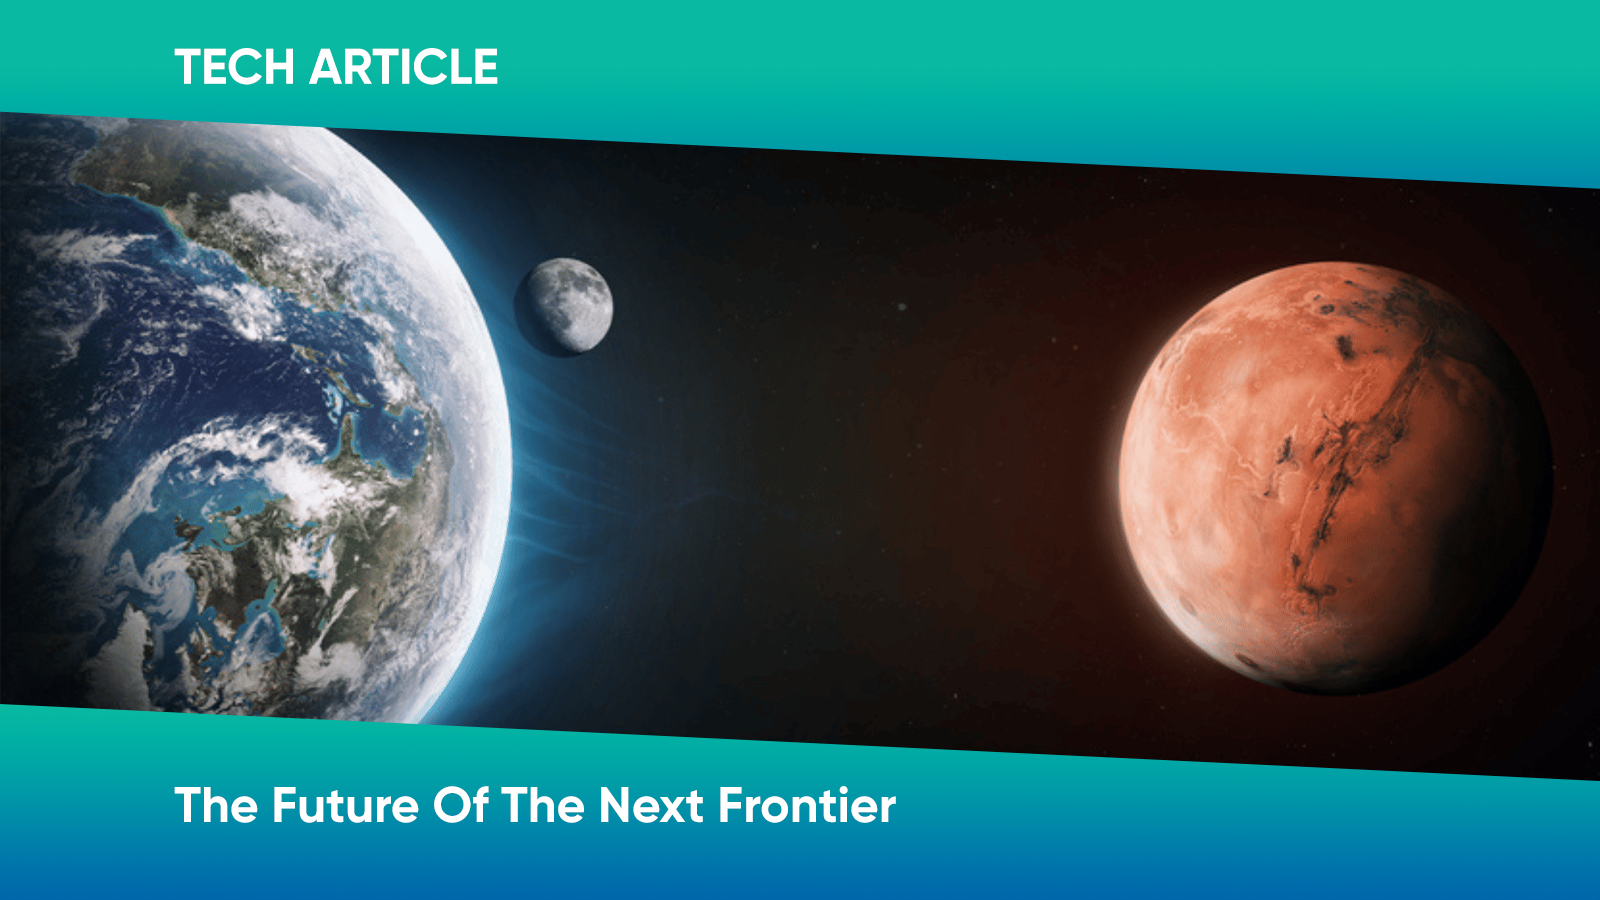 Tech Article | The Future Of The Next Frontier